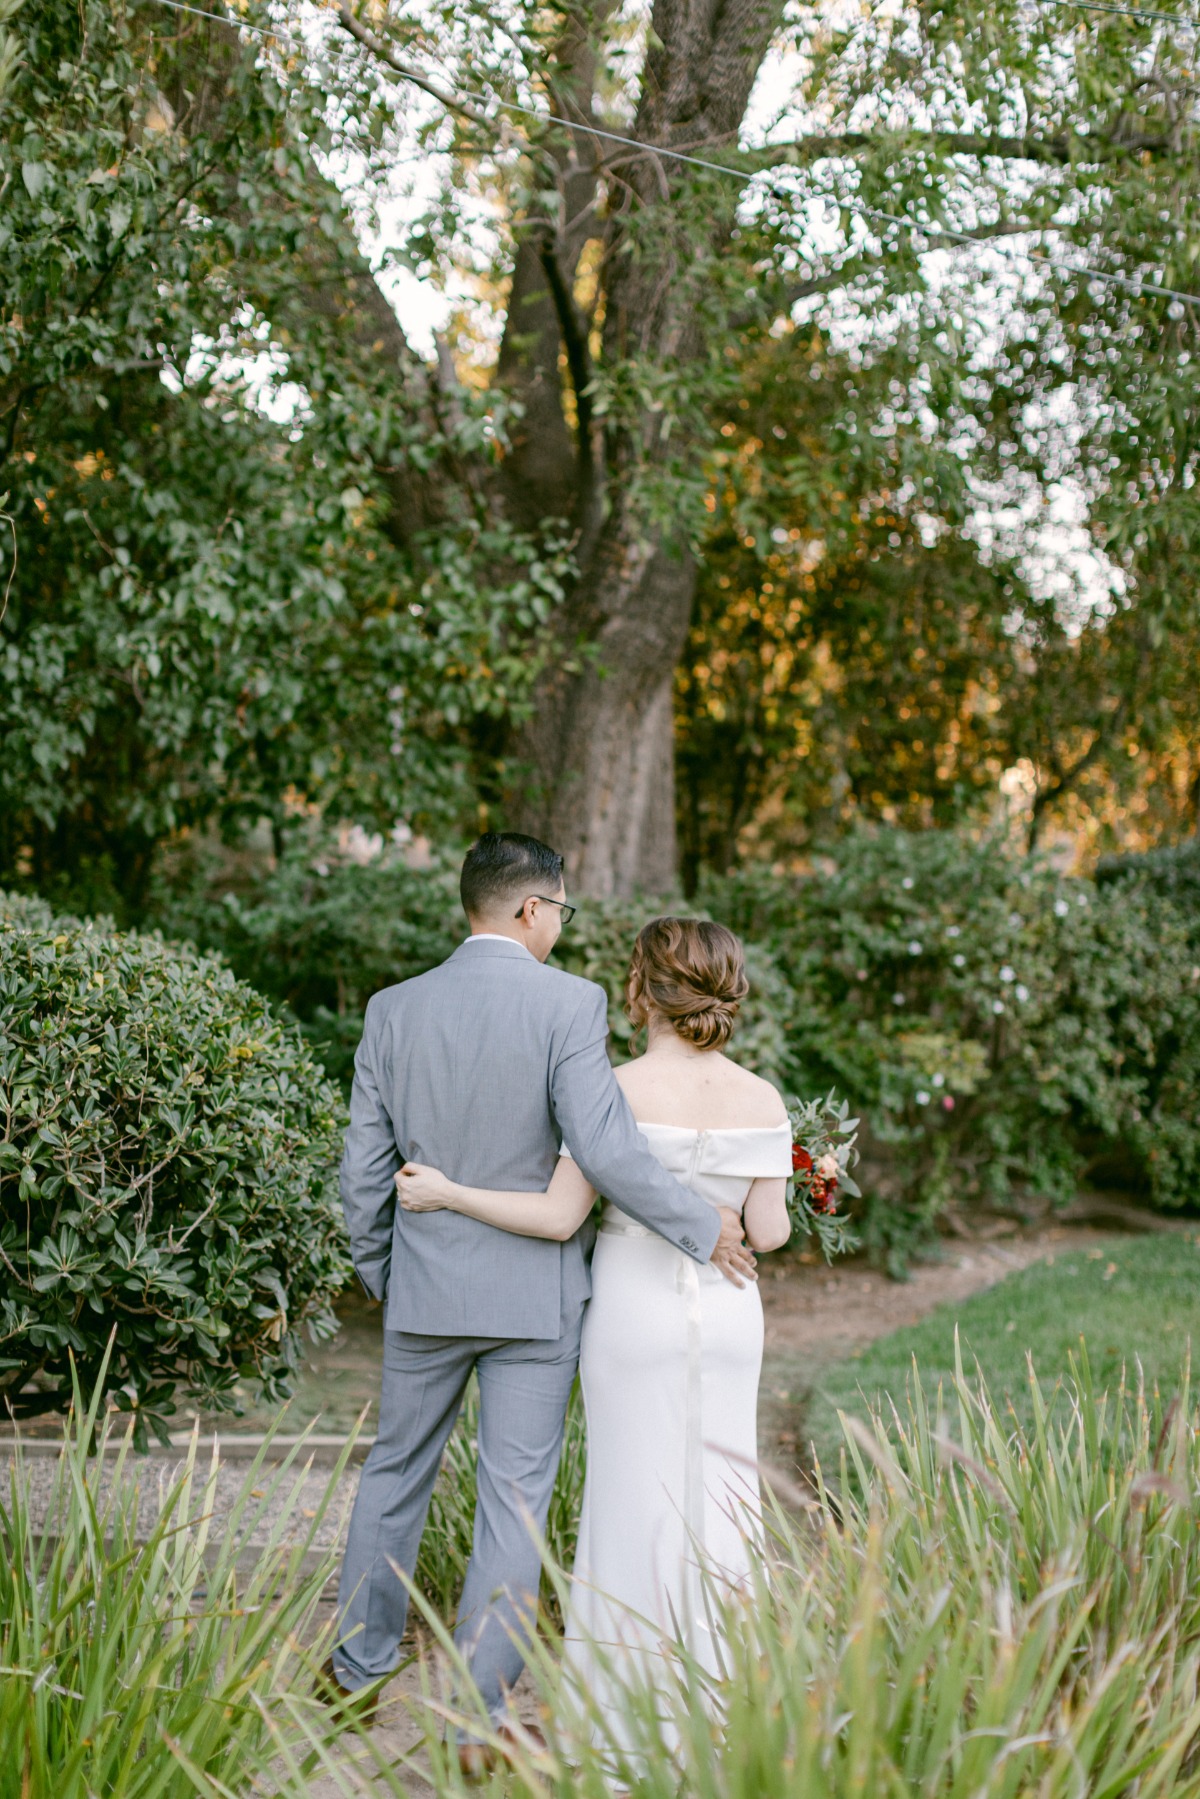 A Moody Micro-Wedding With A Silver Lining